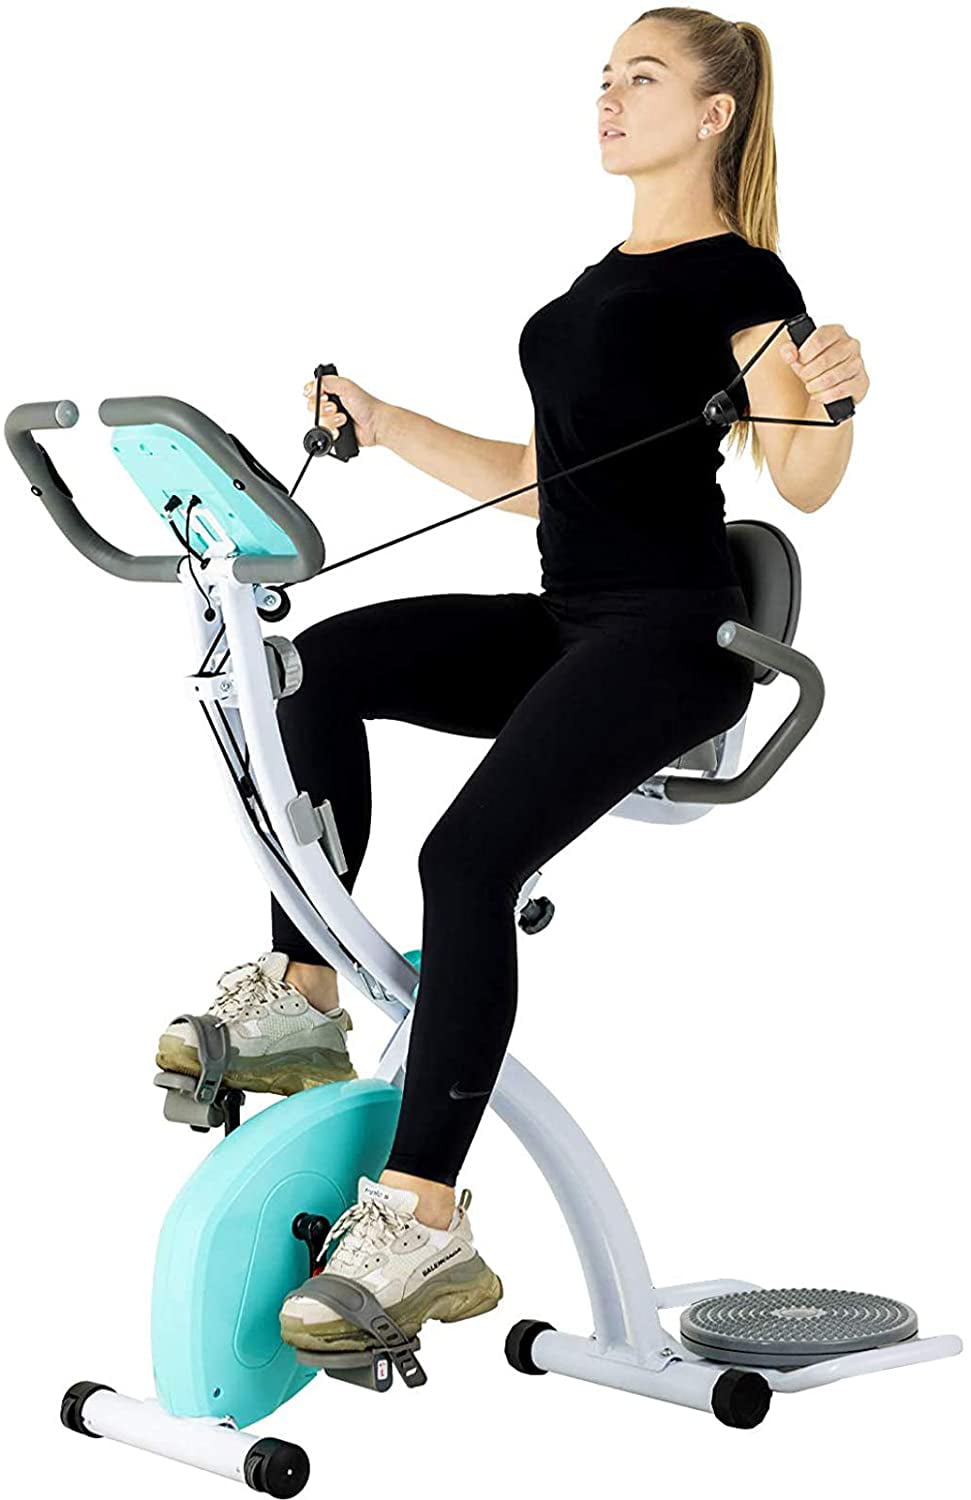 6 Day Stationary Bike Workout Videos Youtube for Women